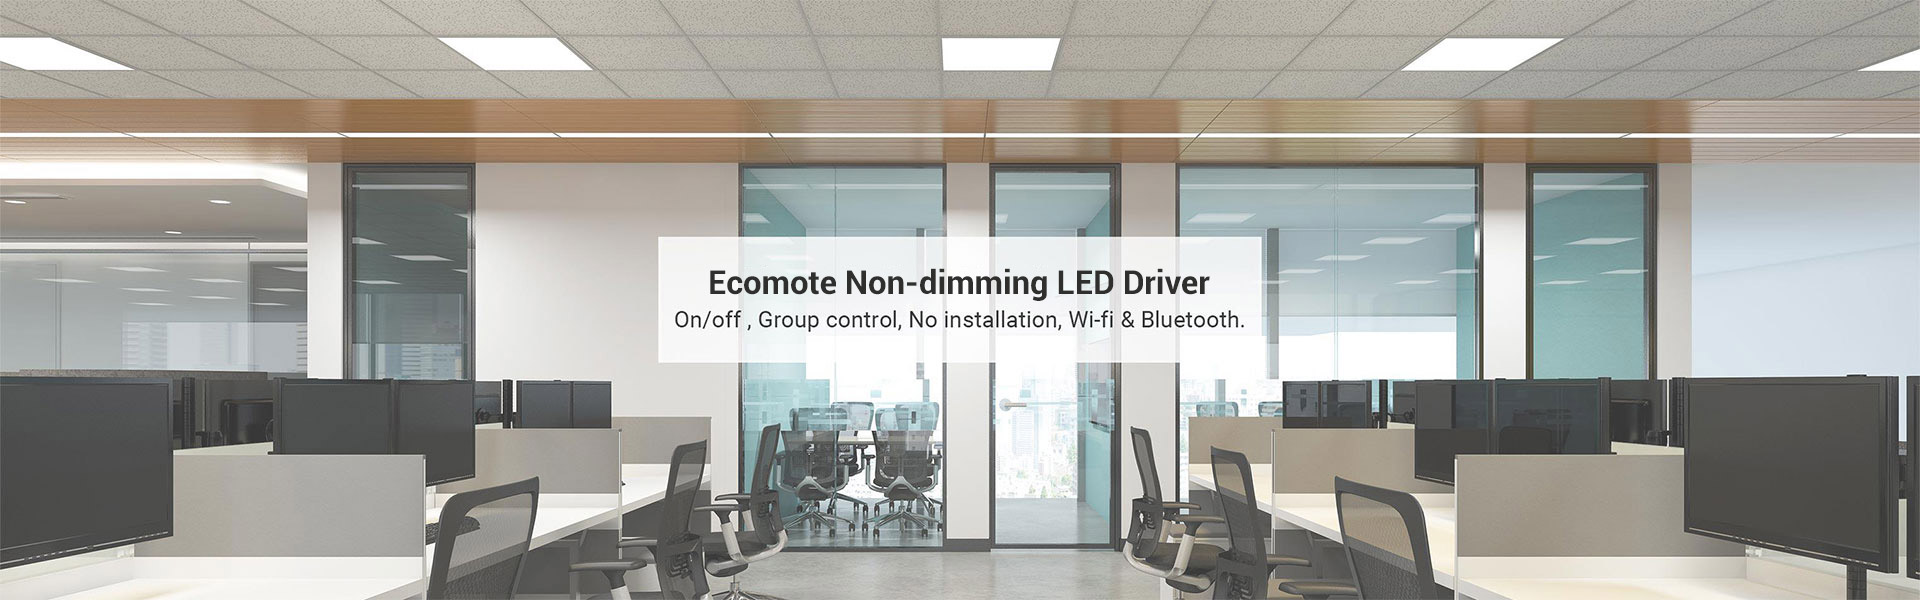 Ecomote Non-dimming LED Driver